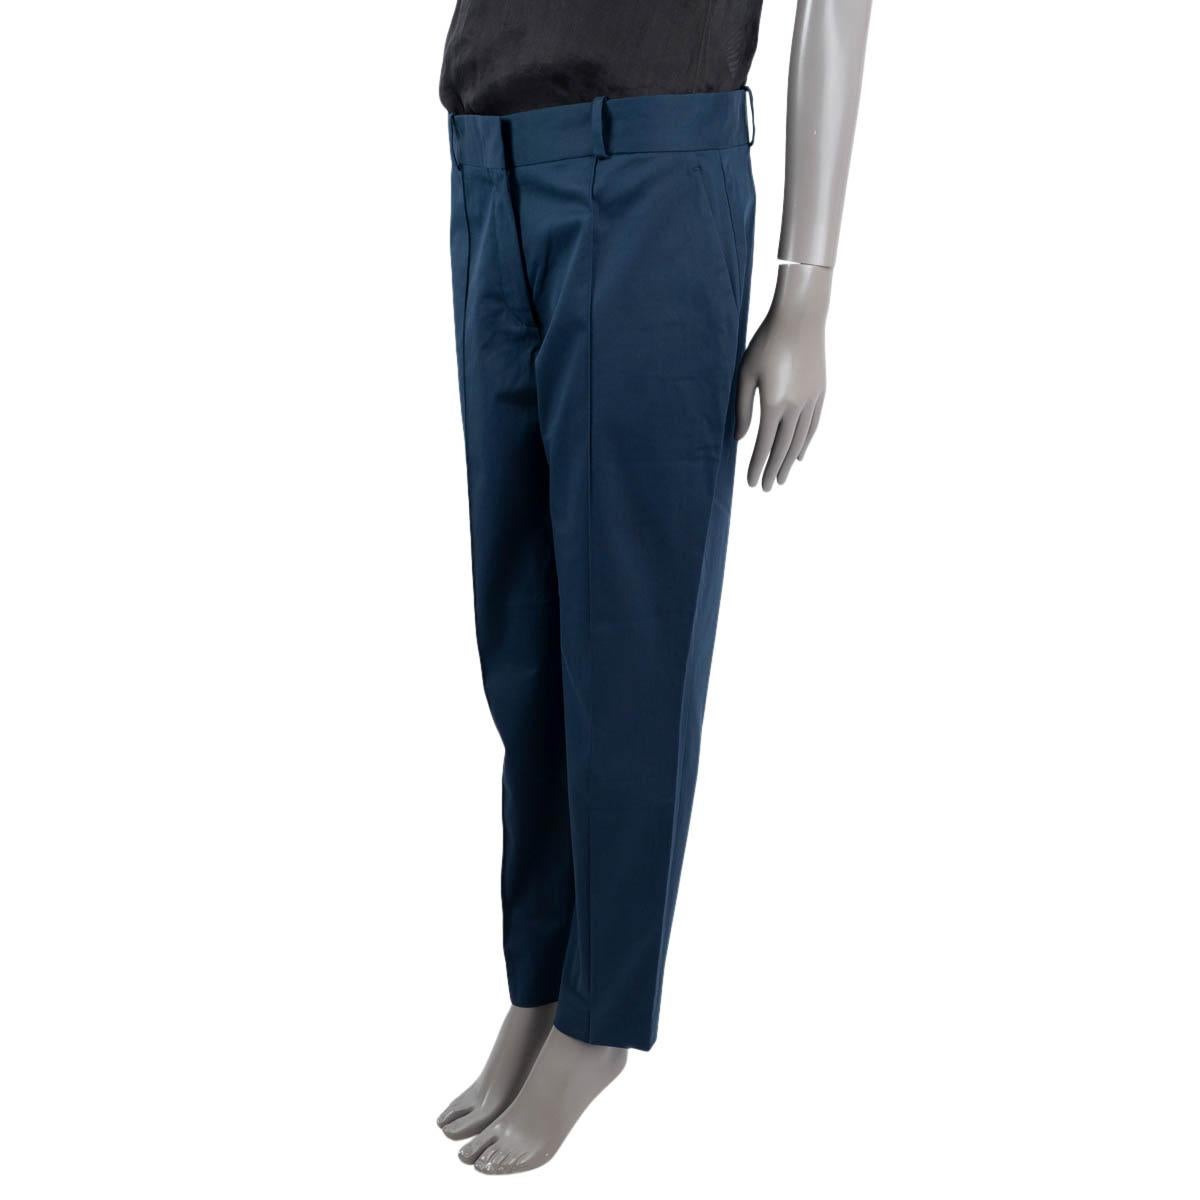 100% authentic Loro Piana tapered pants in dark blue cotton (96%) and elastane (4%) with belt loops. Features two pockets on the side, and two well-pockets on the back. Close on the front with a zipper and hook fasteners. Have been worn and are in